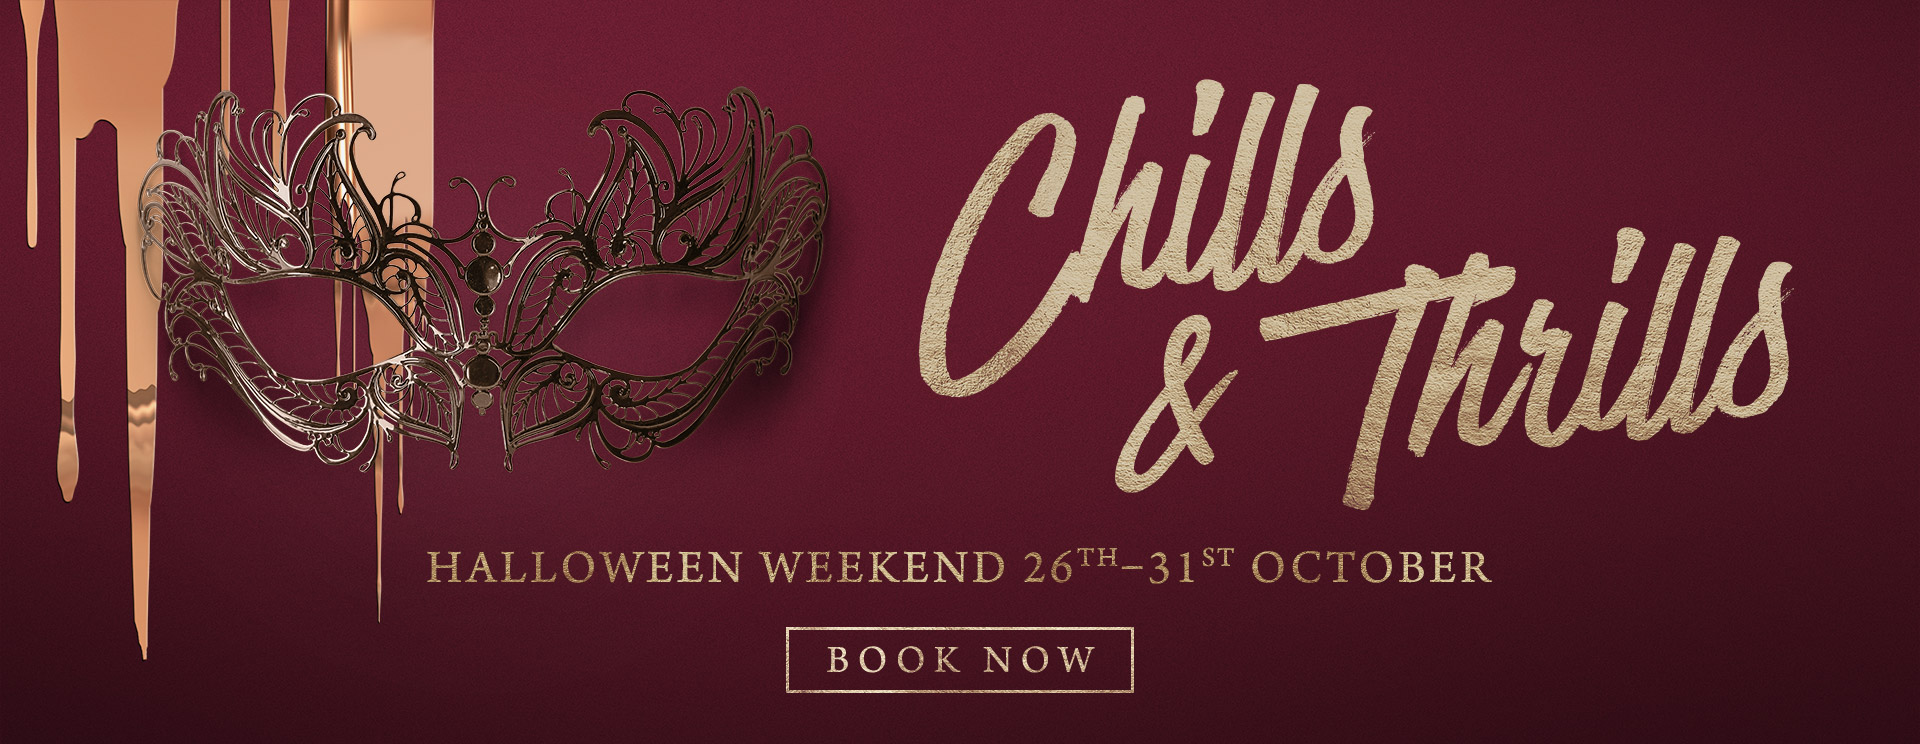 Chills & Thrills this Halloween at The Swan